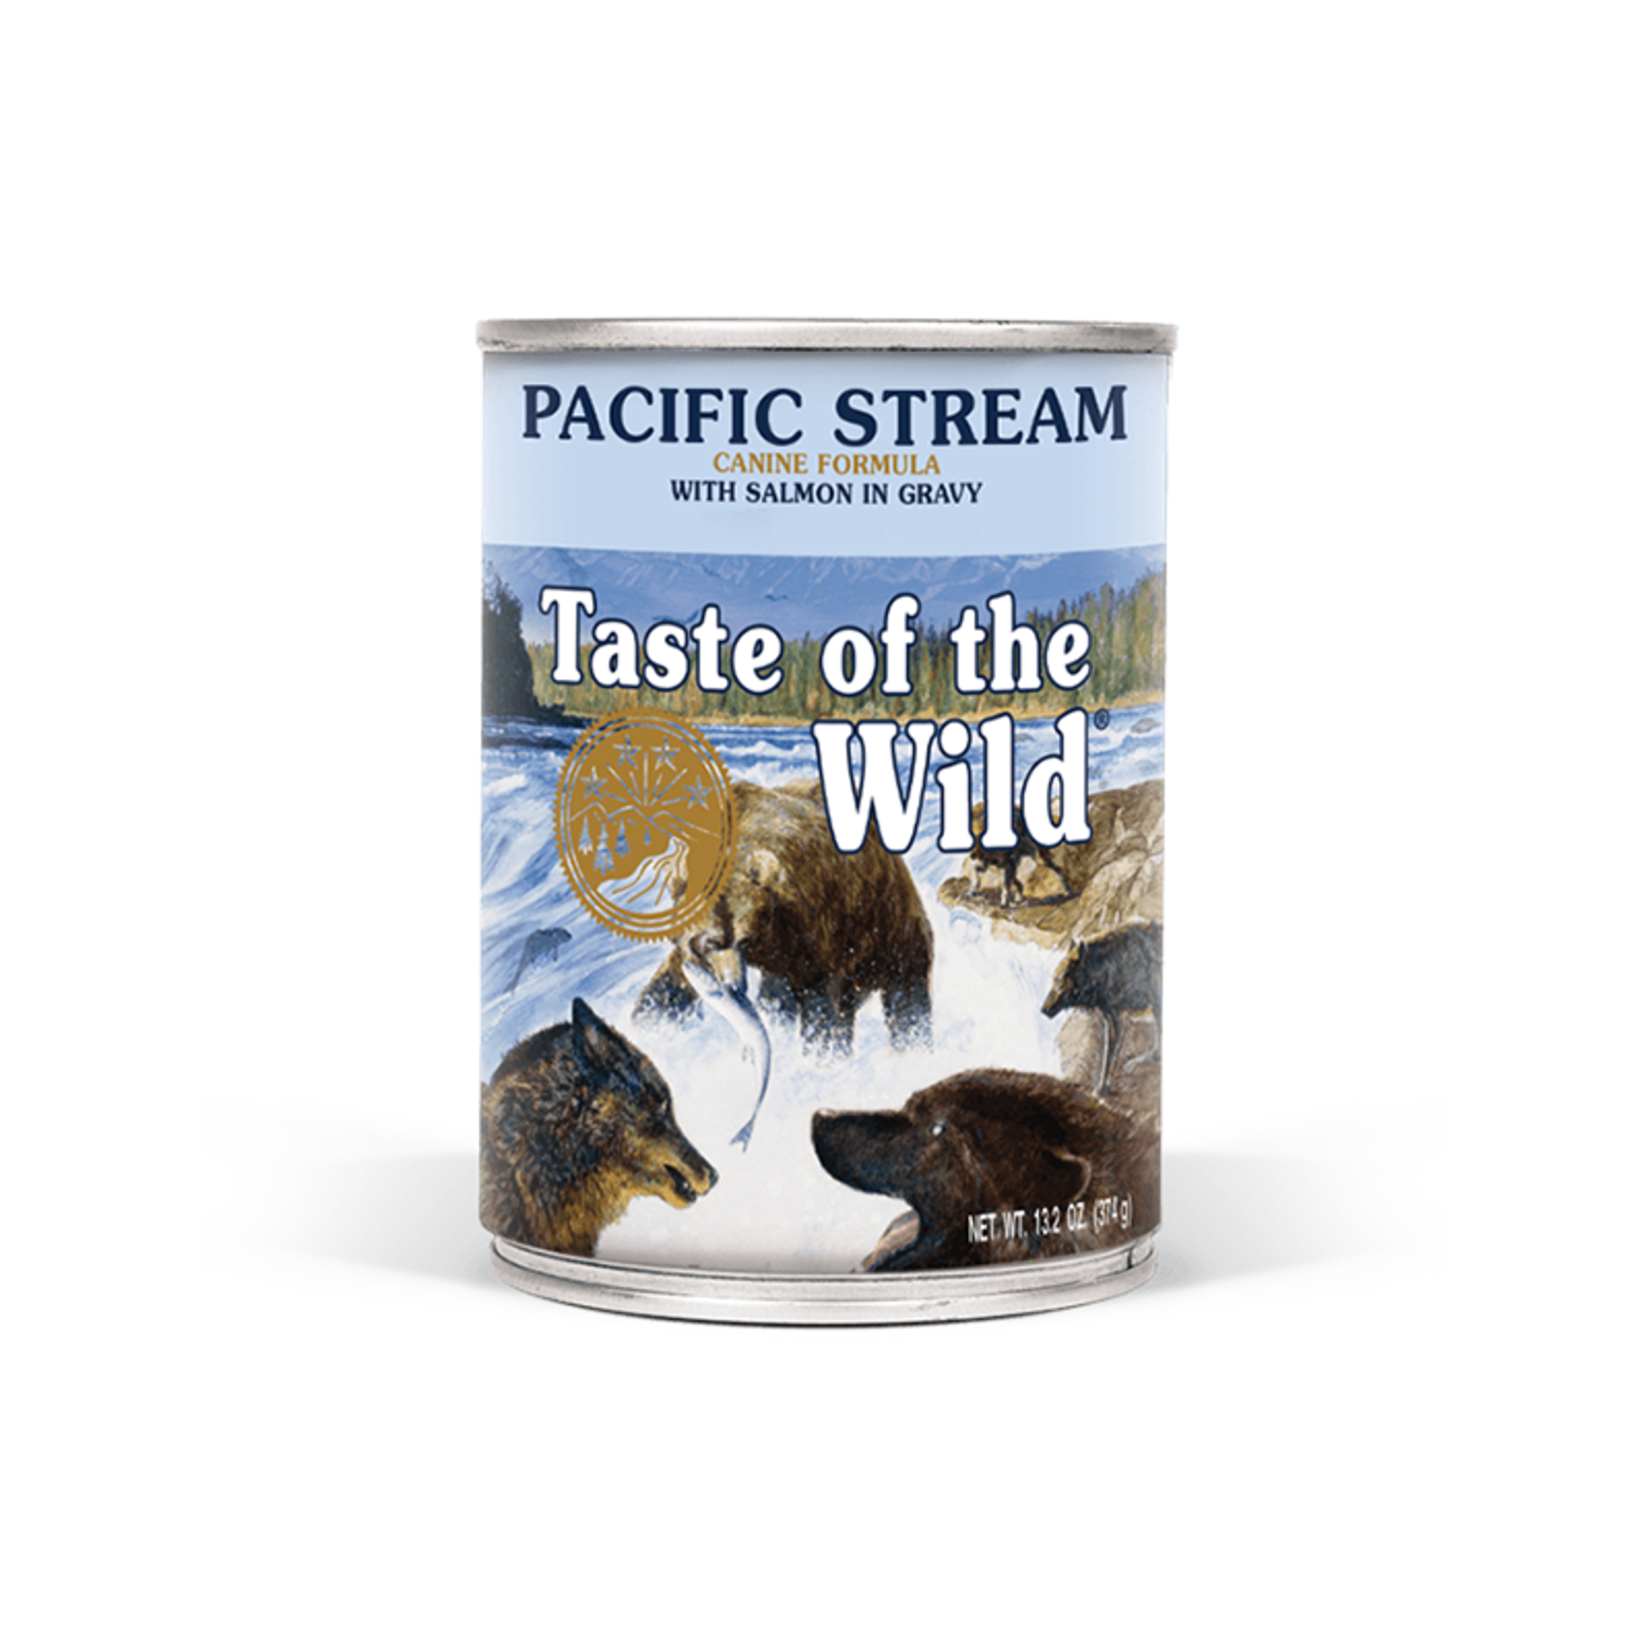 Taste of the Wild Taste of the Wild Wet Dog Food Pacific Stream Formula with Salmon in Gravy 13oz Can Grain Free